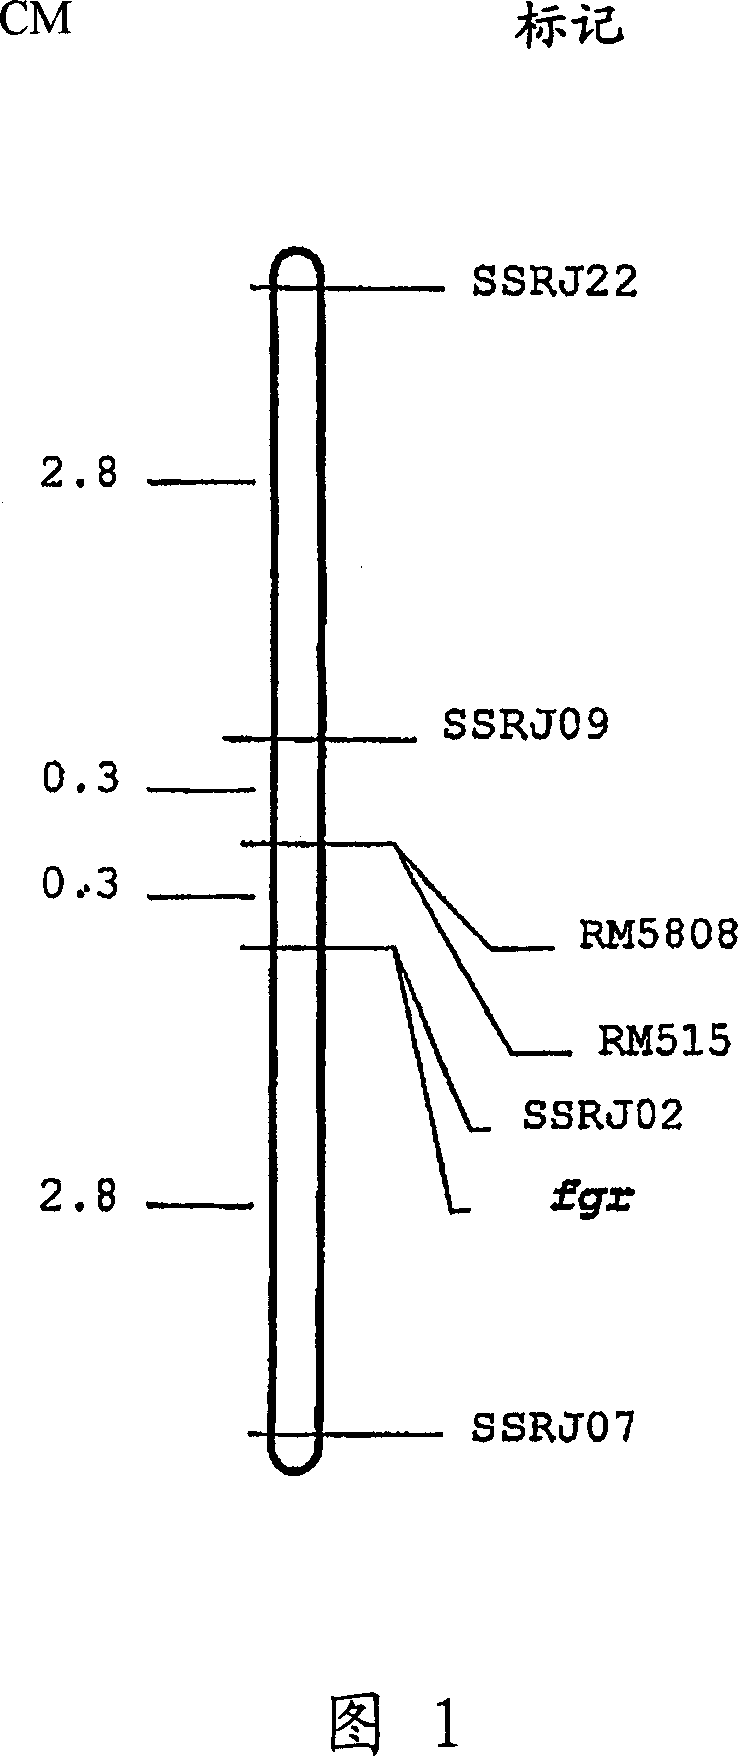 Method for generating frangrance flavor through inactivation or reduction functional protein with betaine aldehyde dehydrogenase (BADH) activity